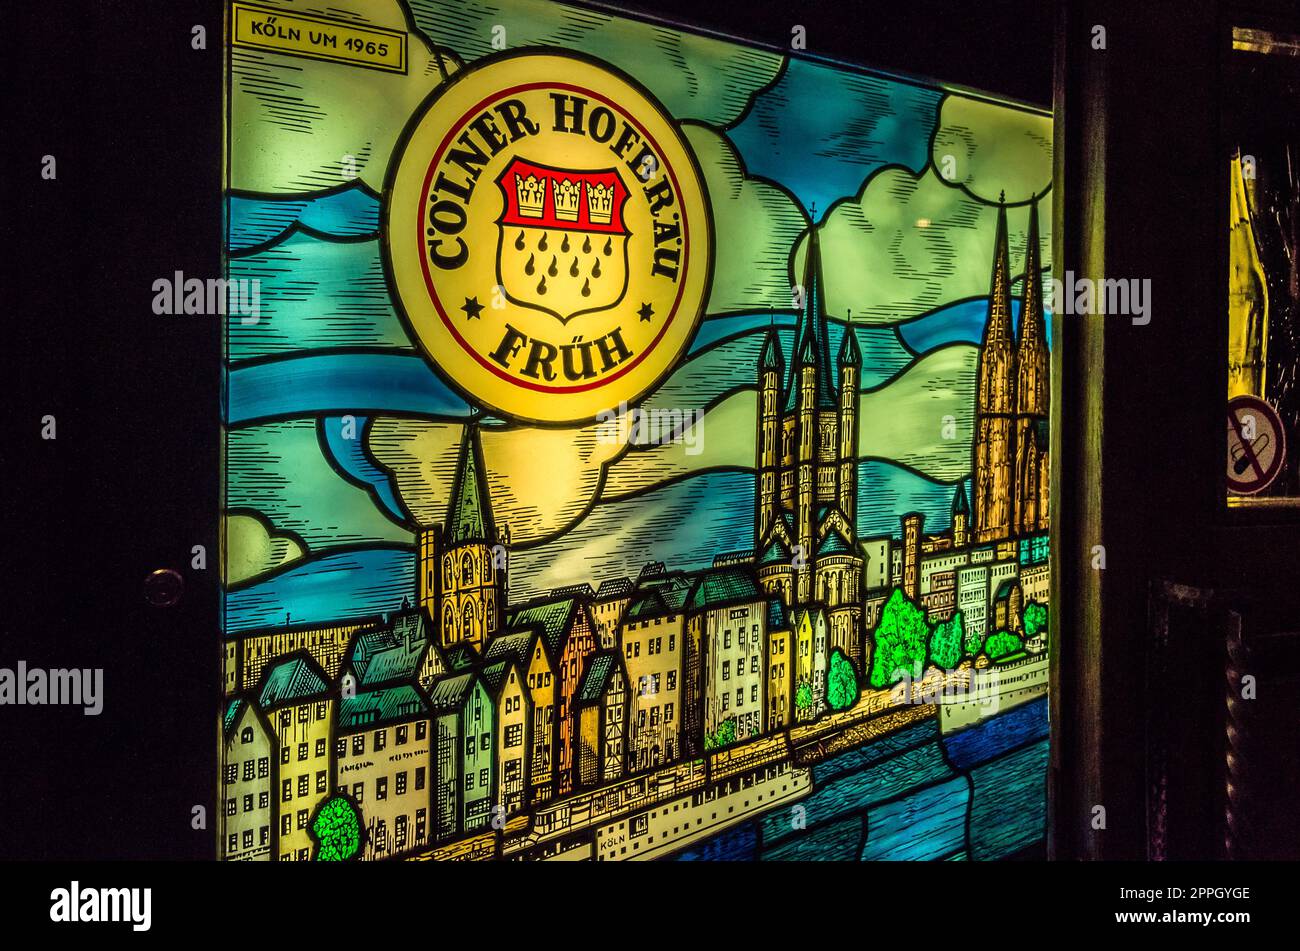 COLOGNE (KOLN), GERMANY - AUGUST 19, 2013: Decorated wall at the entrance of a restaurant in Cologne, Germany Stock Photo